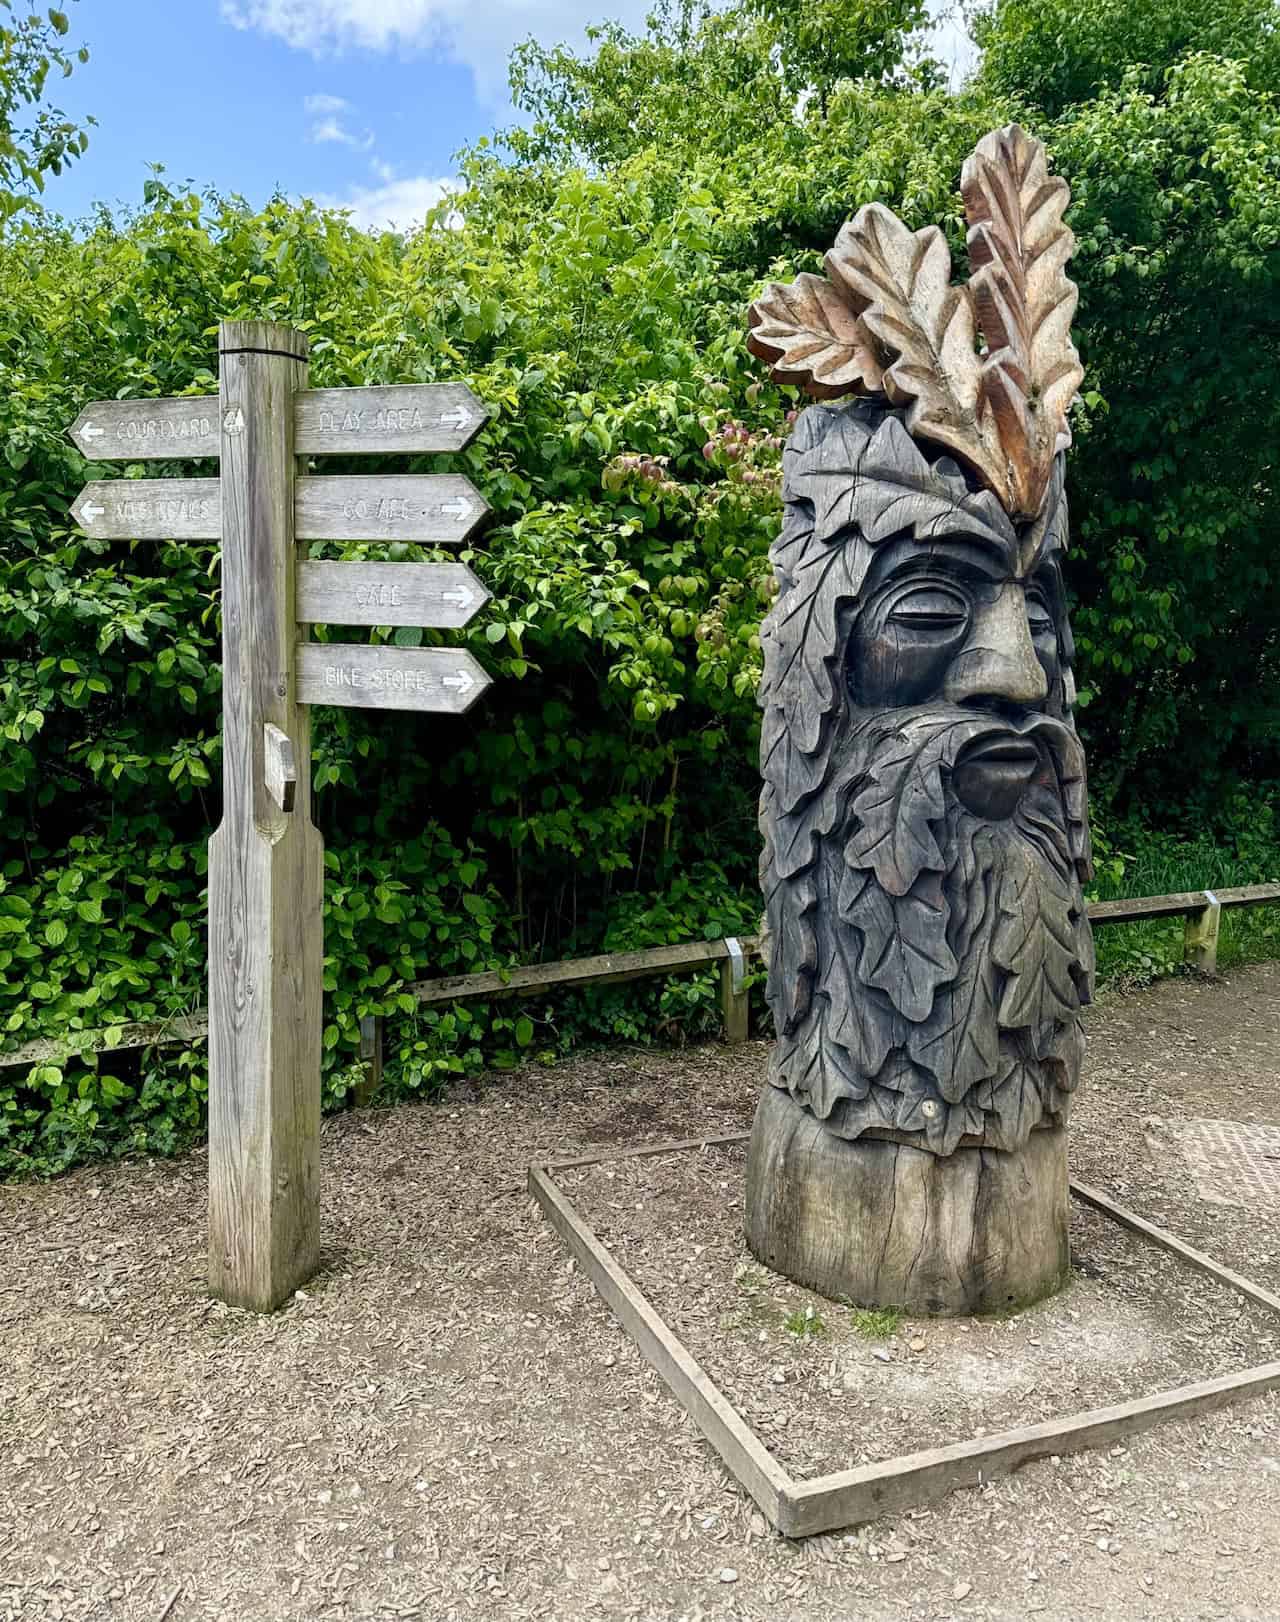 Just outside the visitor centre entrance, we admire an amazing wood carving.